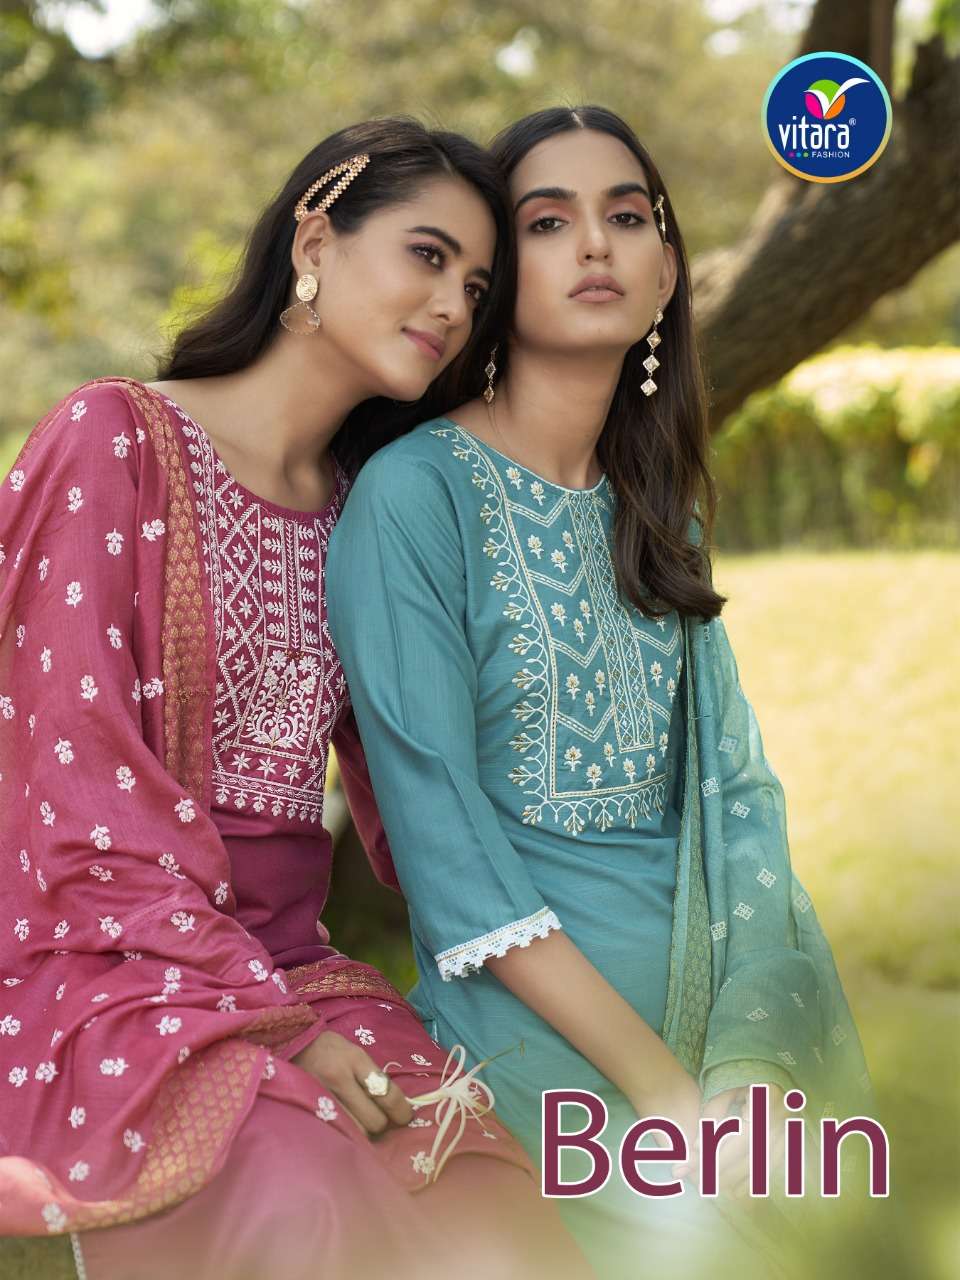 vitara fashion launches berlin exclusive designer kurti pent with dupatta specially for summer	